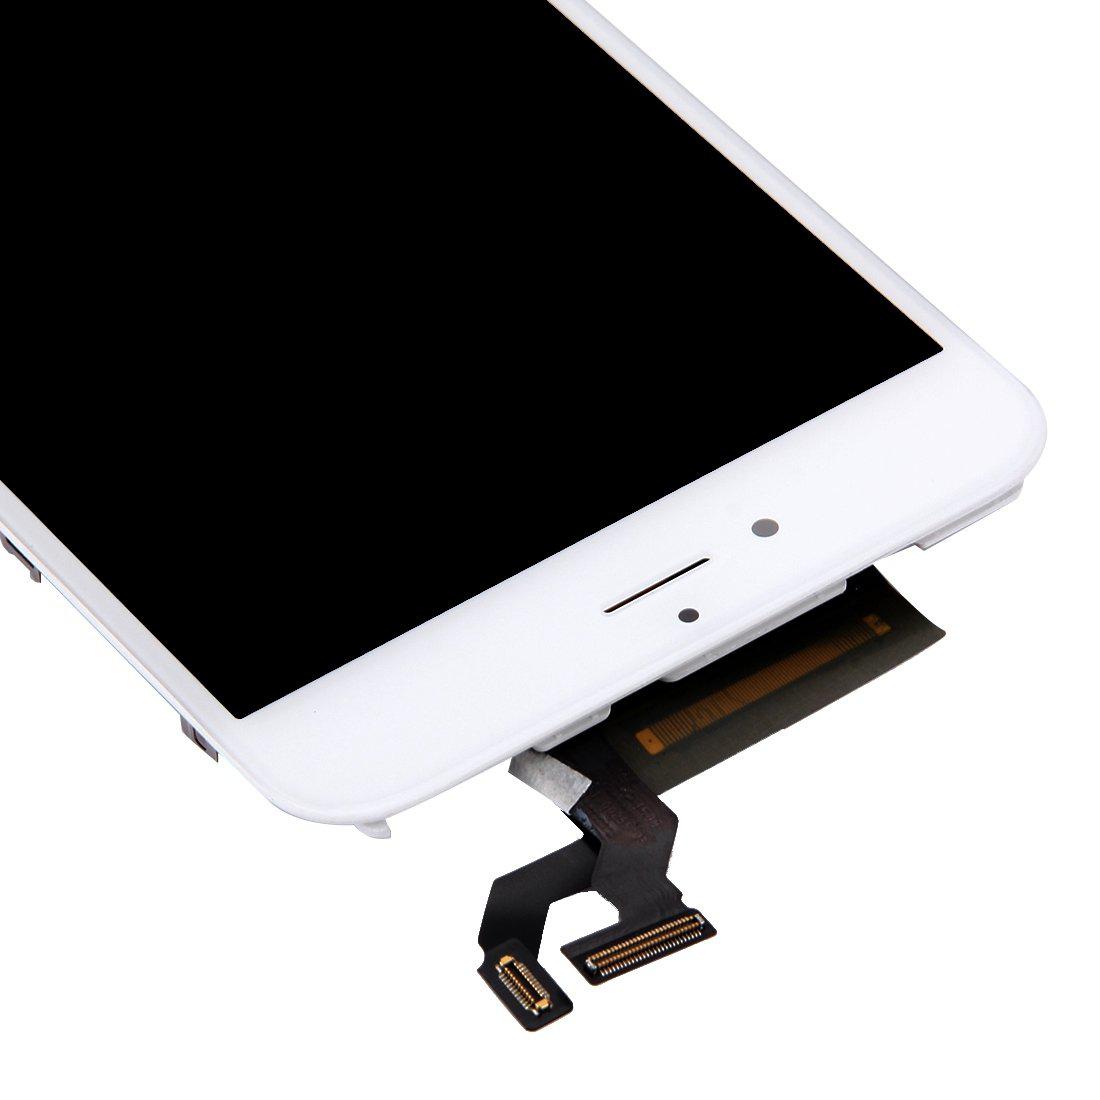 Apple iPhone 6s Plus 5.5" Replacement LCD Touch Screen Assembly - White for [product_price] - First Help Tech